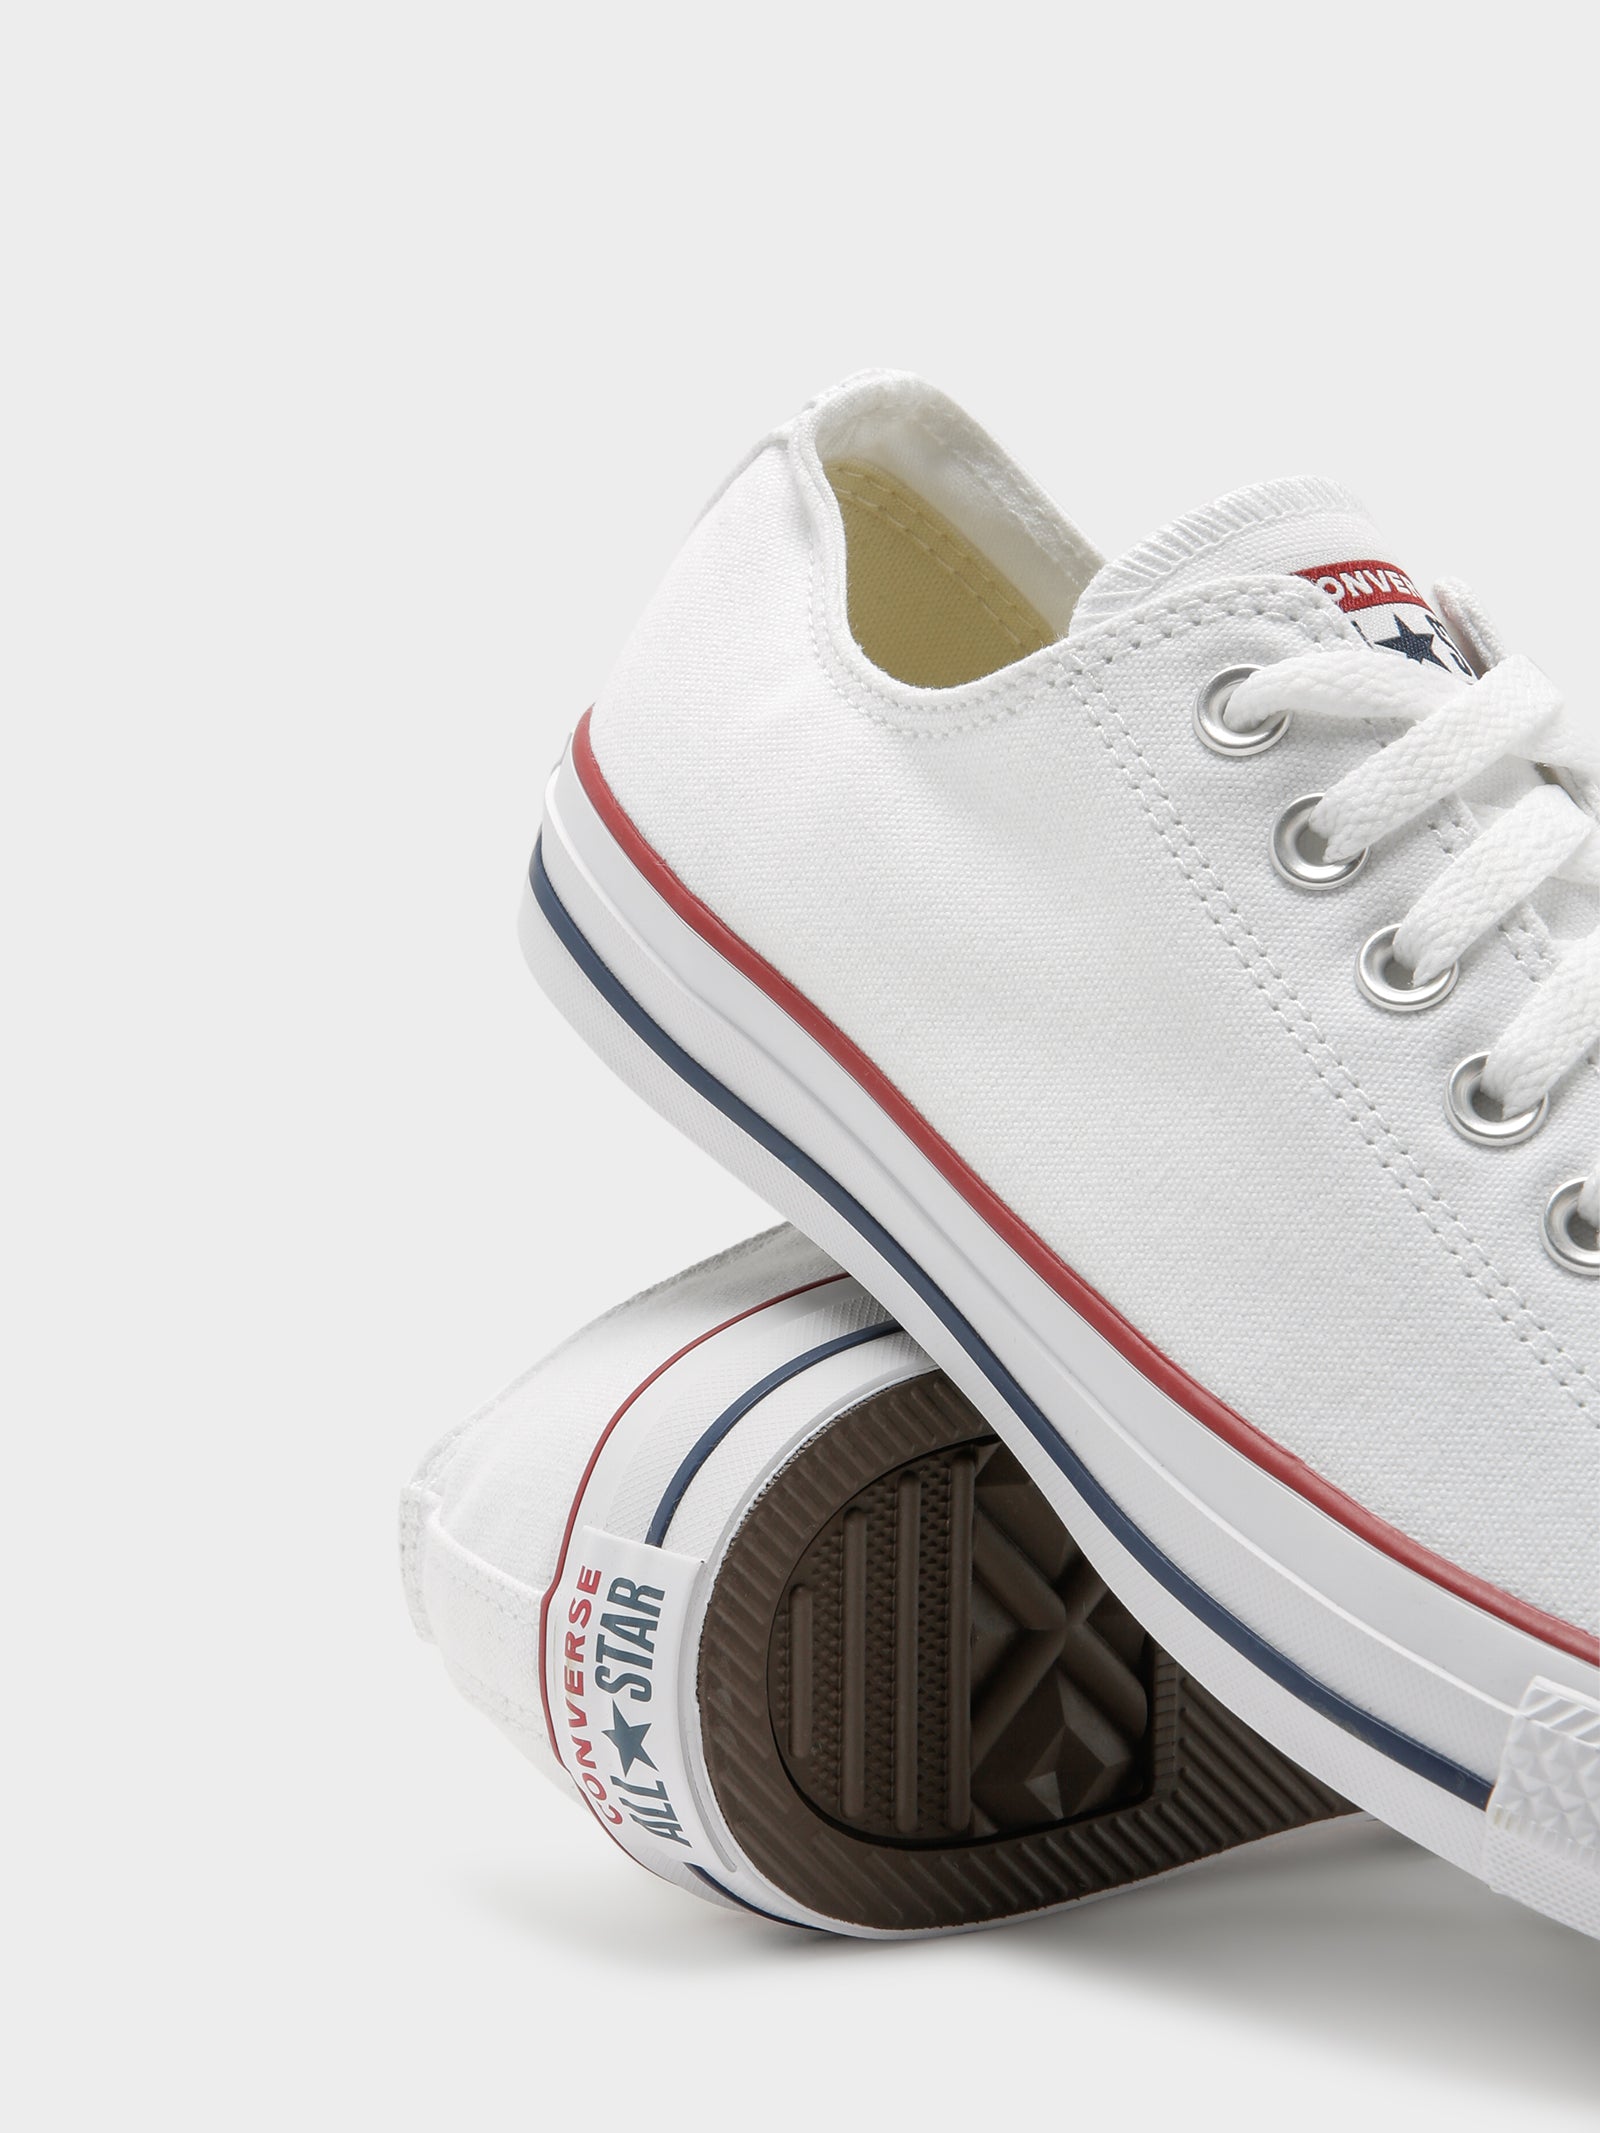 converse classic low white